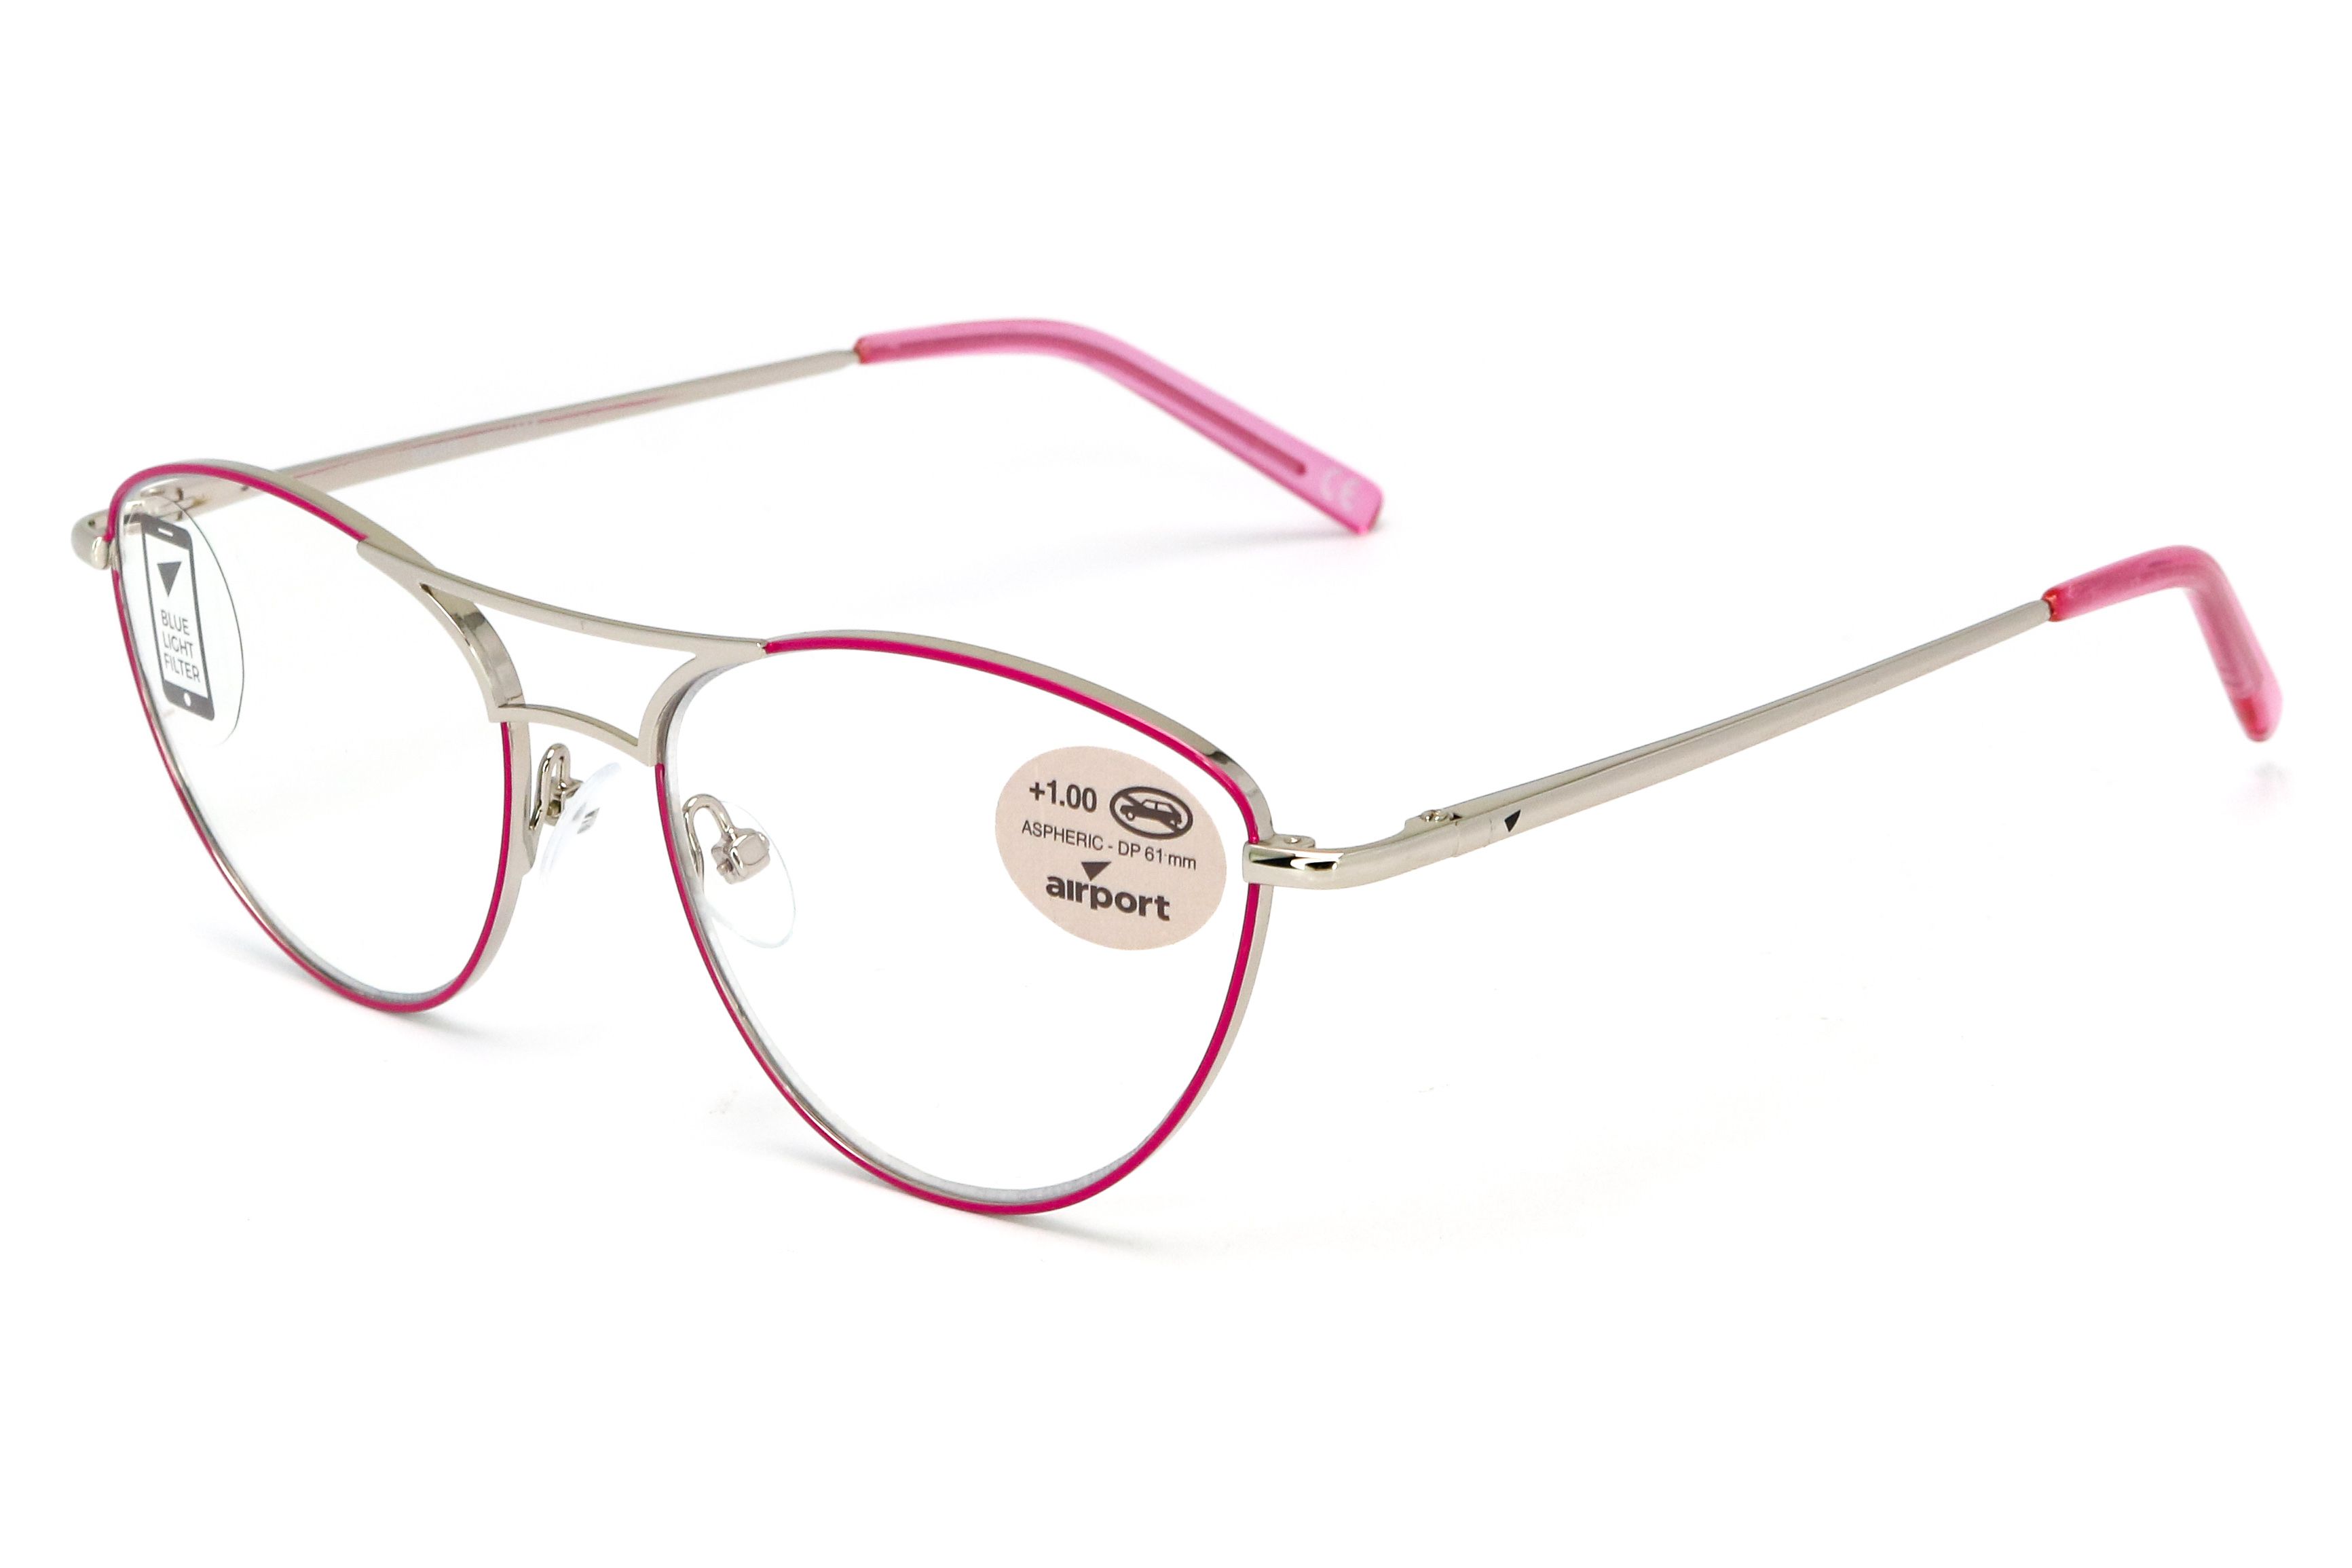 Airport Ready Reader-1865 2122 Fuchsia/Silver with Blue Light Filter